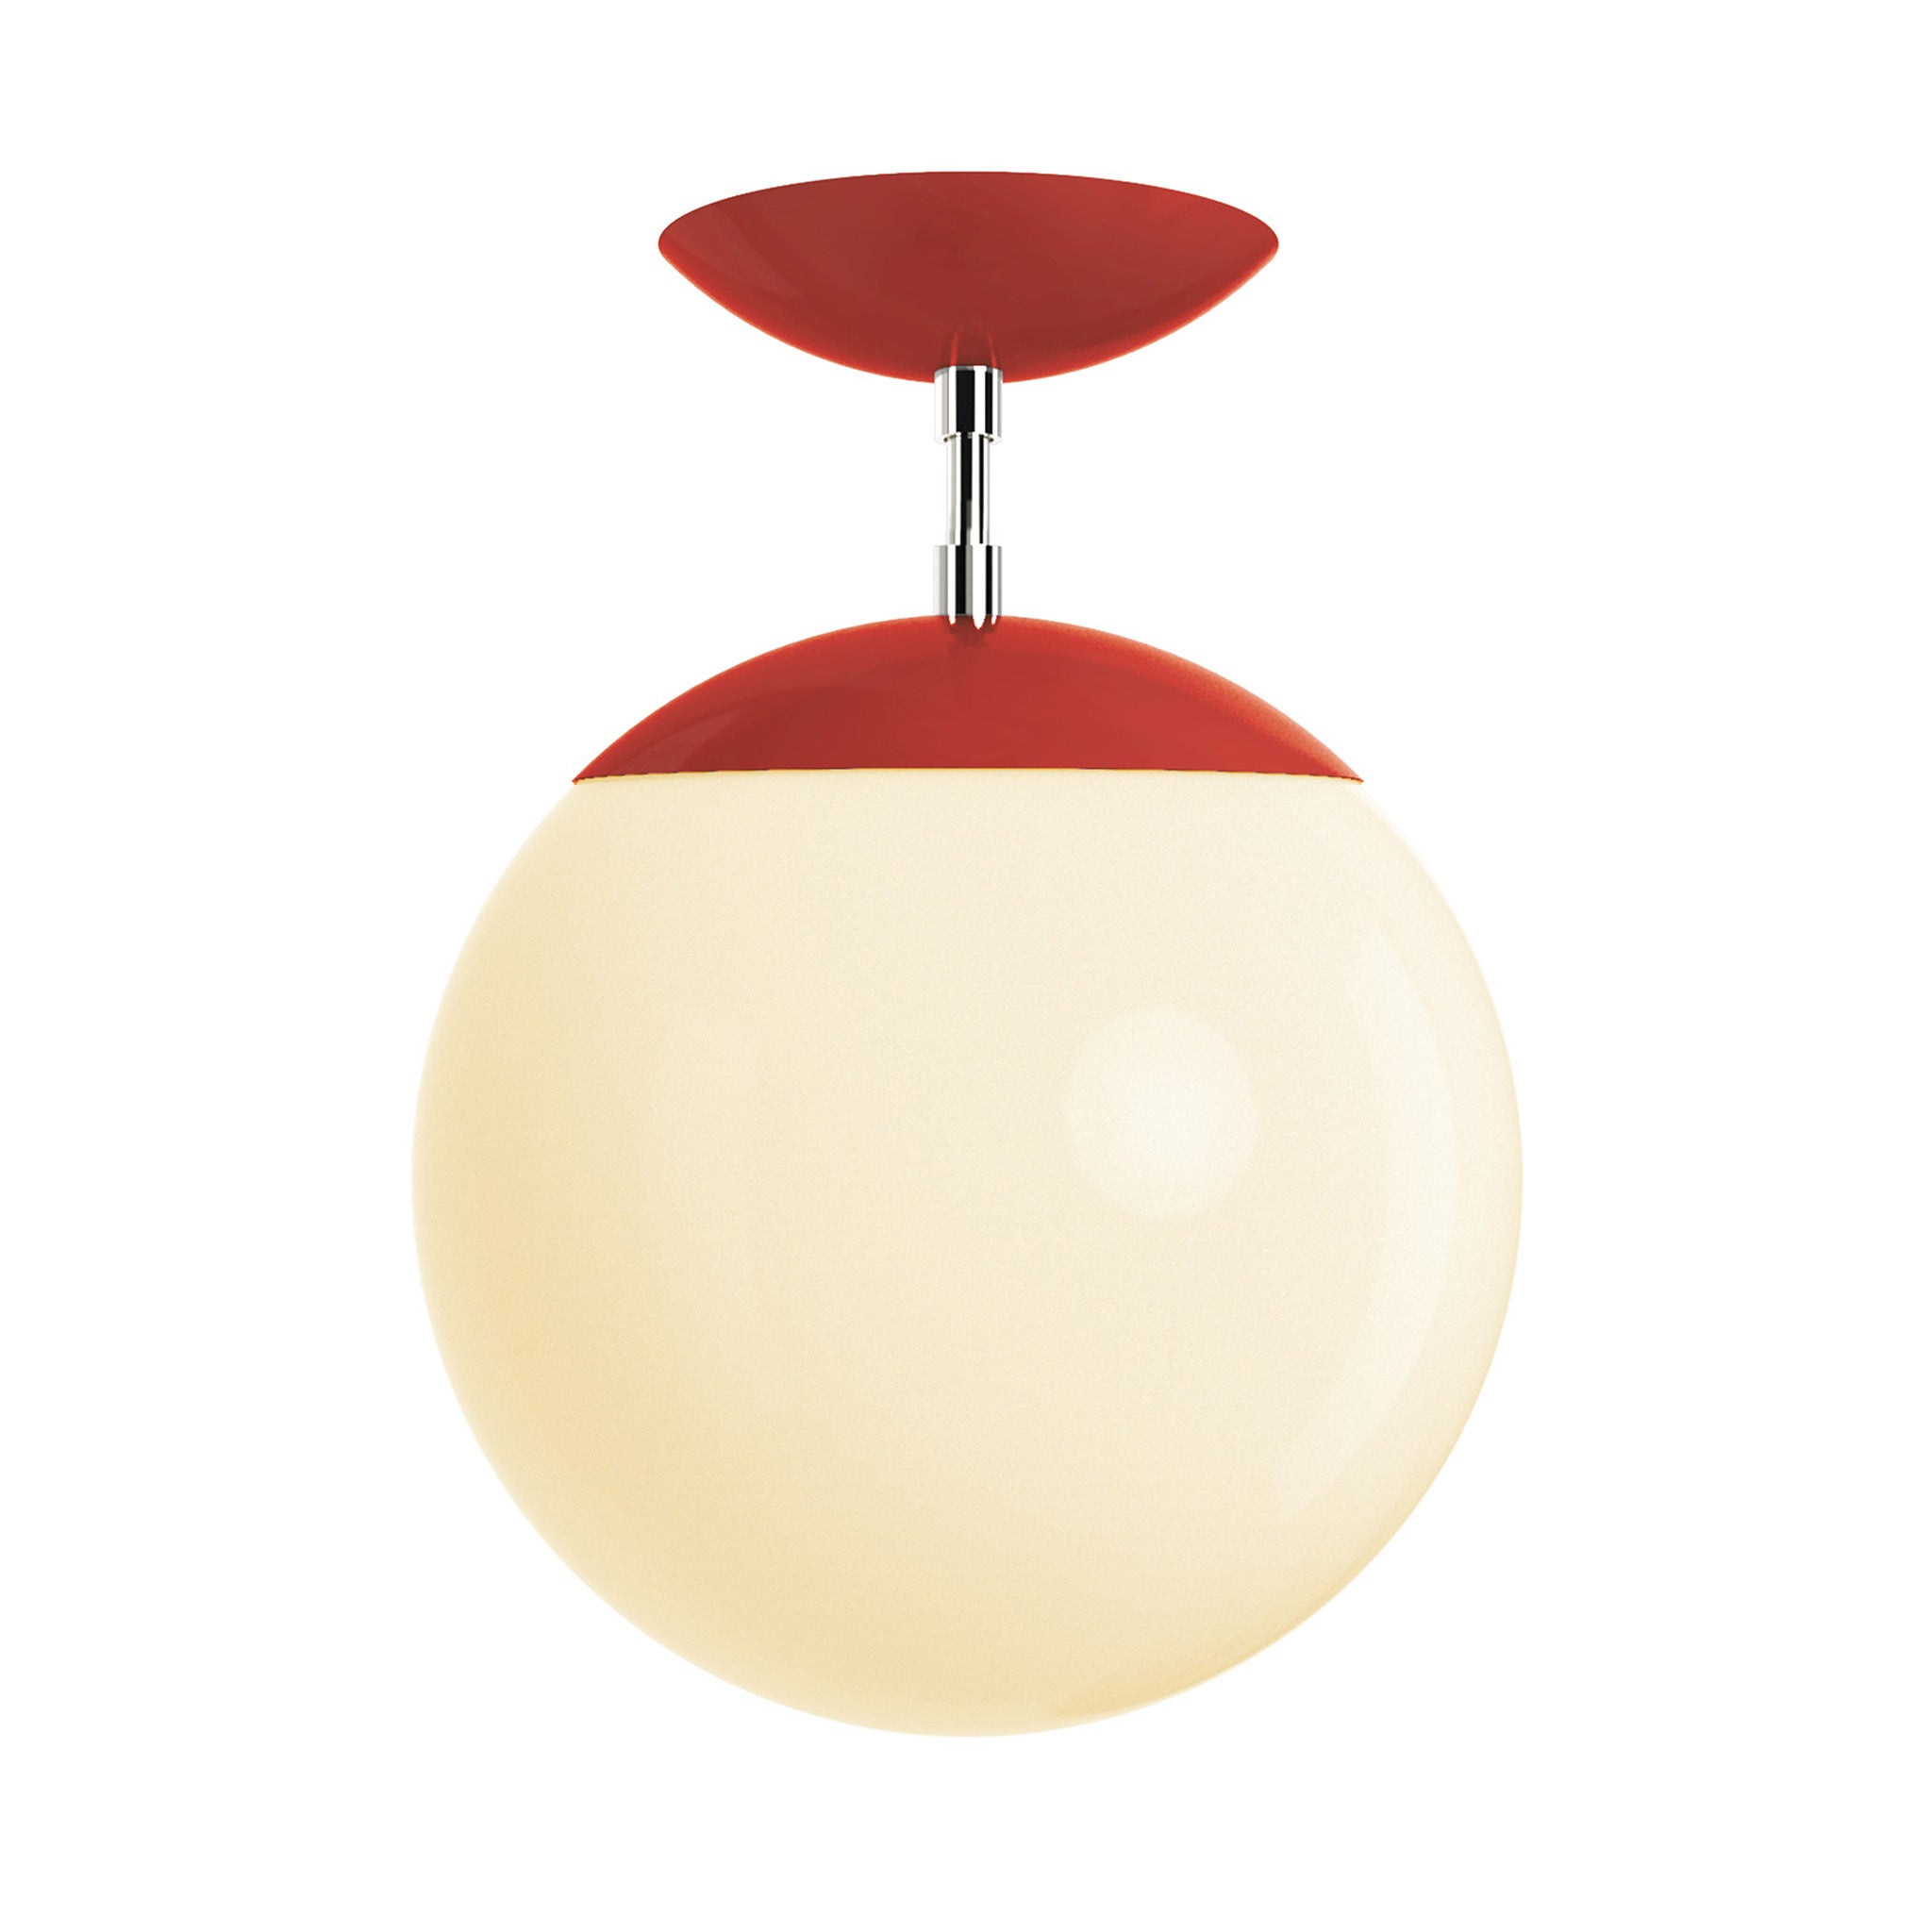 Polished nickel and riding hood red cap globe flush mount 10" dutton brown lighting